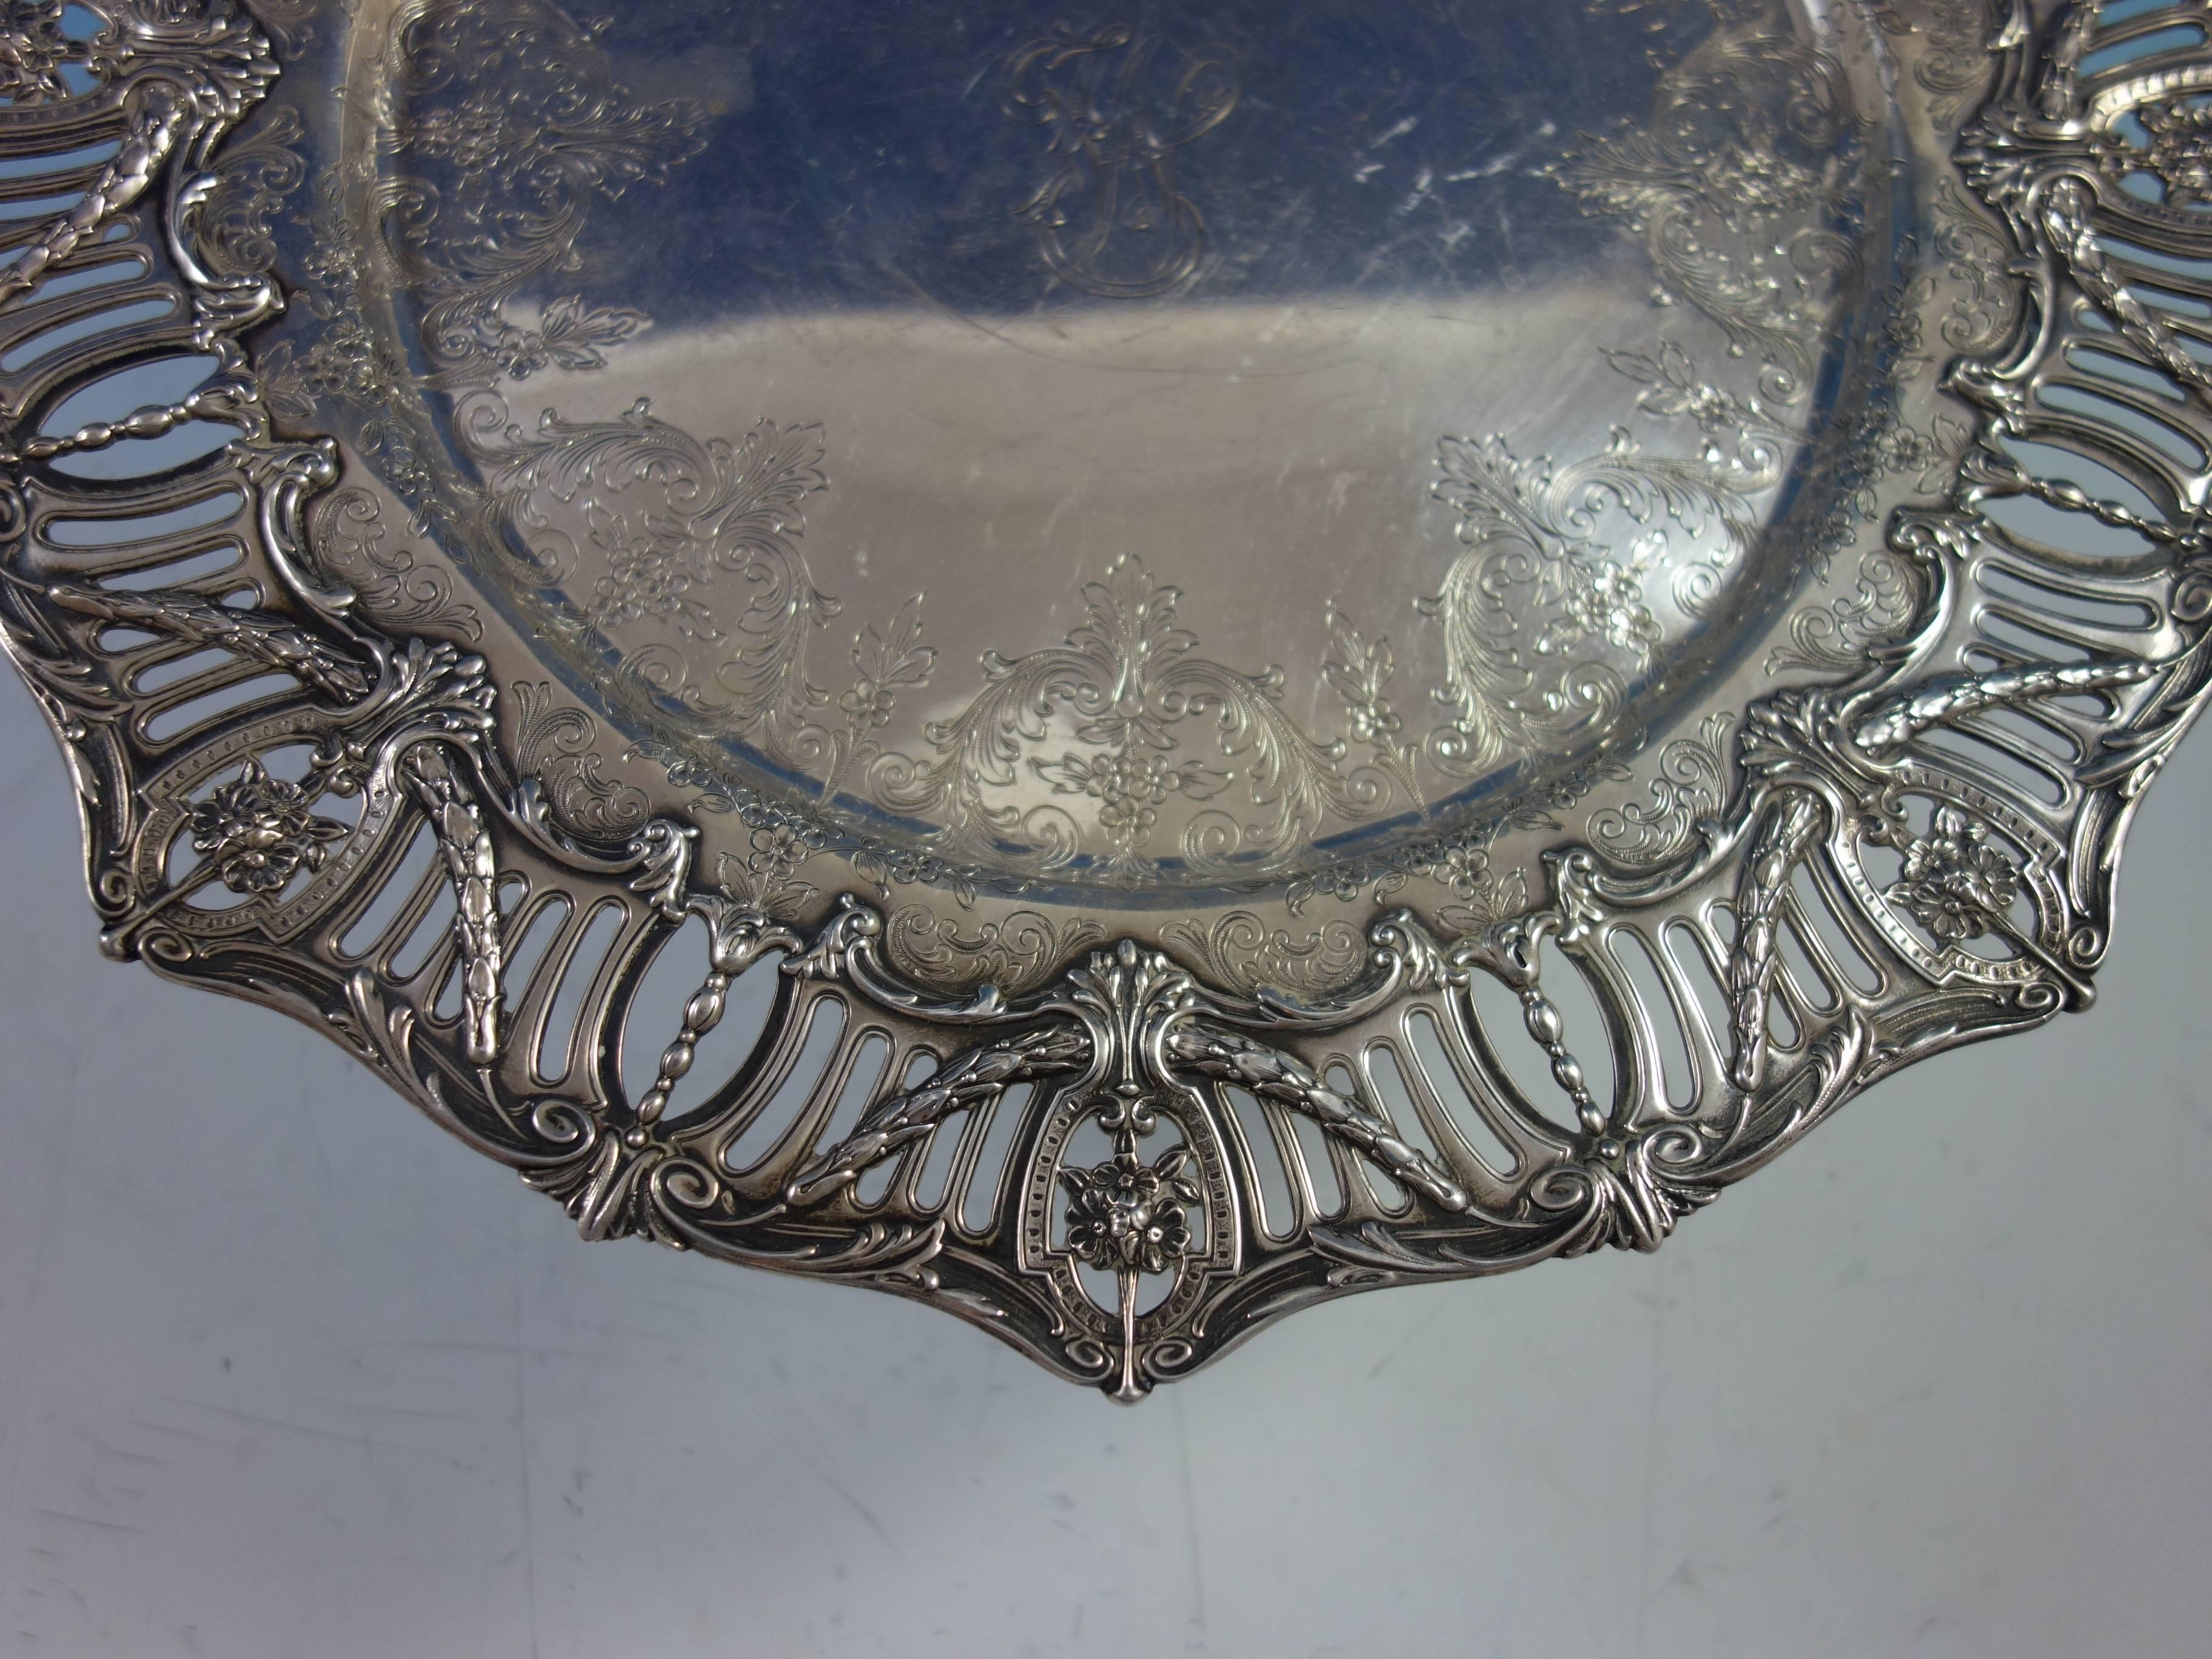 Pierced Border by J.E Caldwell sterling silver sandwich plate/platter. It features a pierced applied cast border with swags and hand chased interior. It has a vintage monogram and an inscription on the reverse with date November 24, 1937 (see